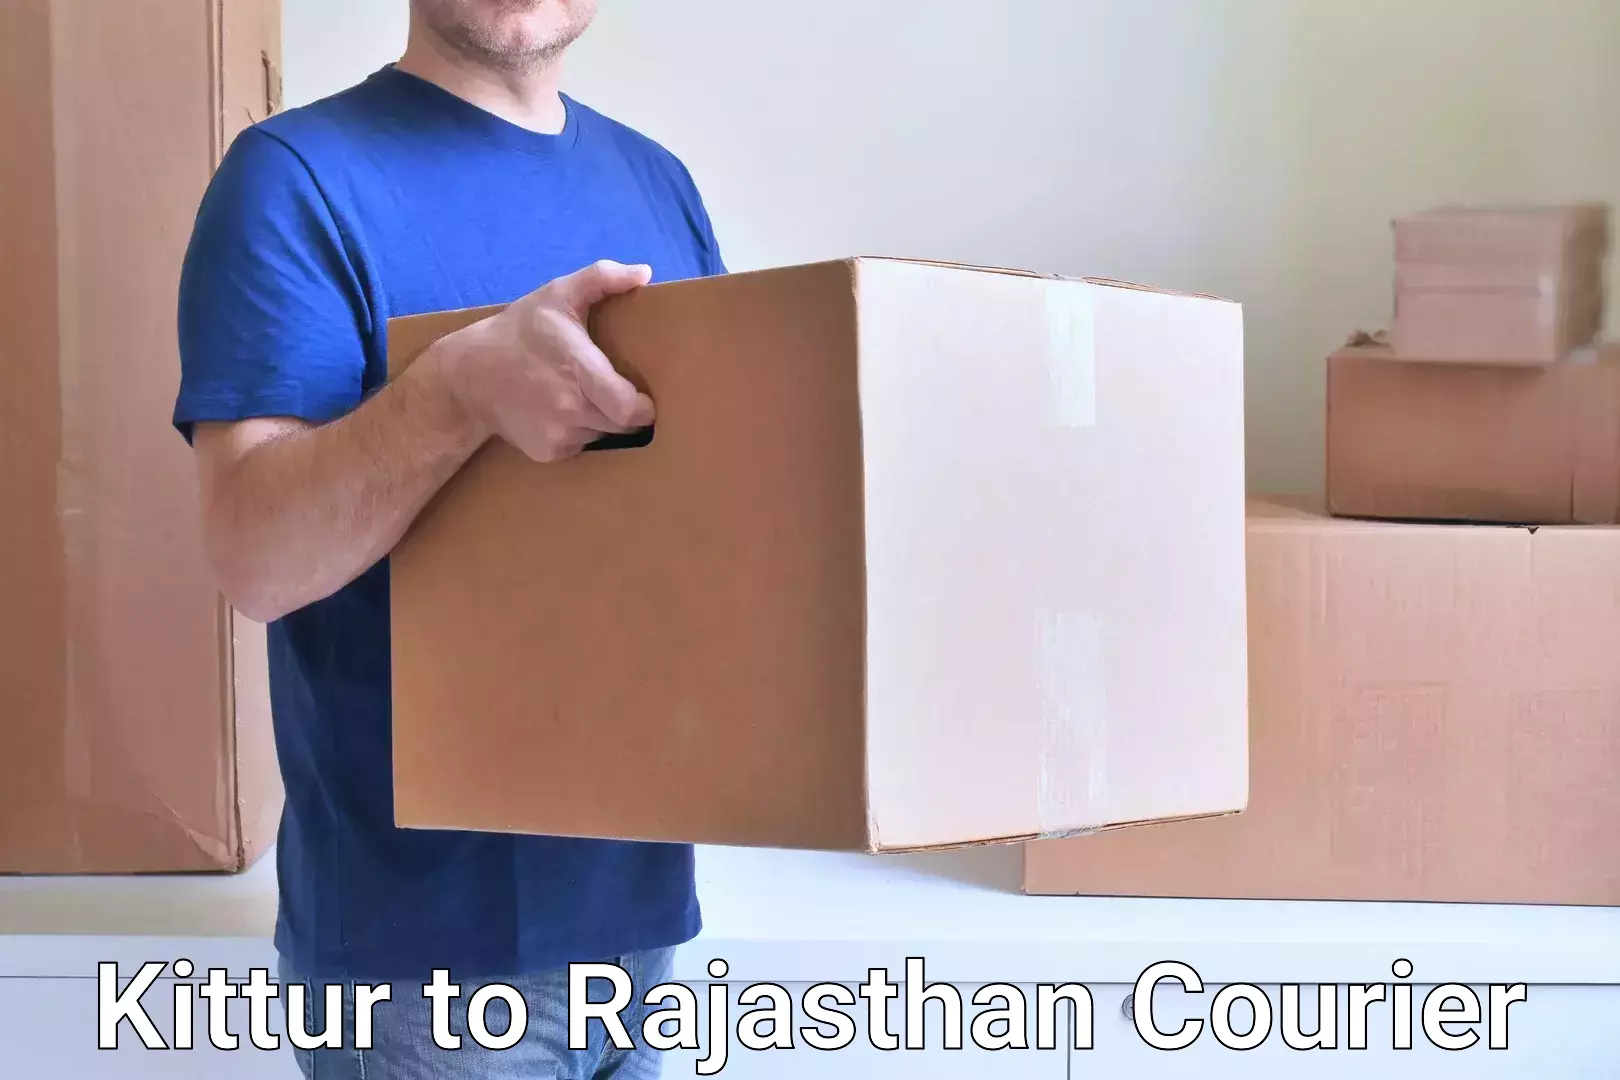 E-commerce logistics support Kittur to Rajasthan